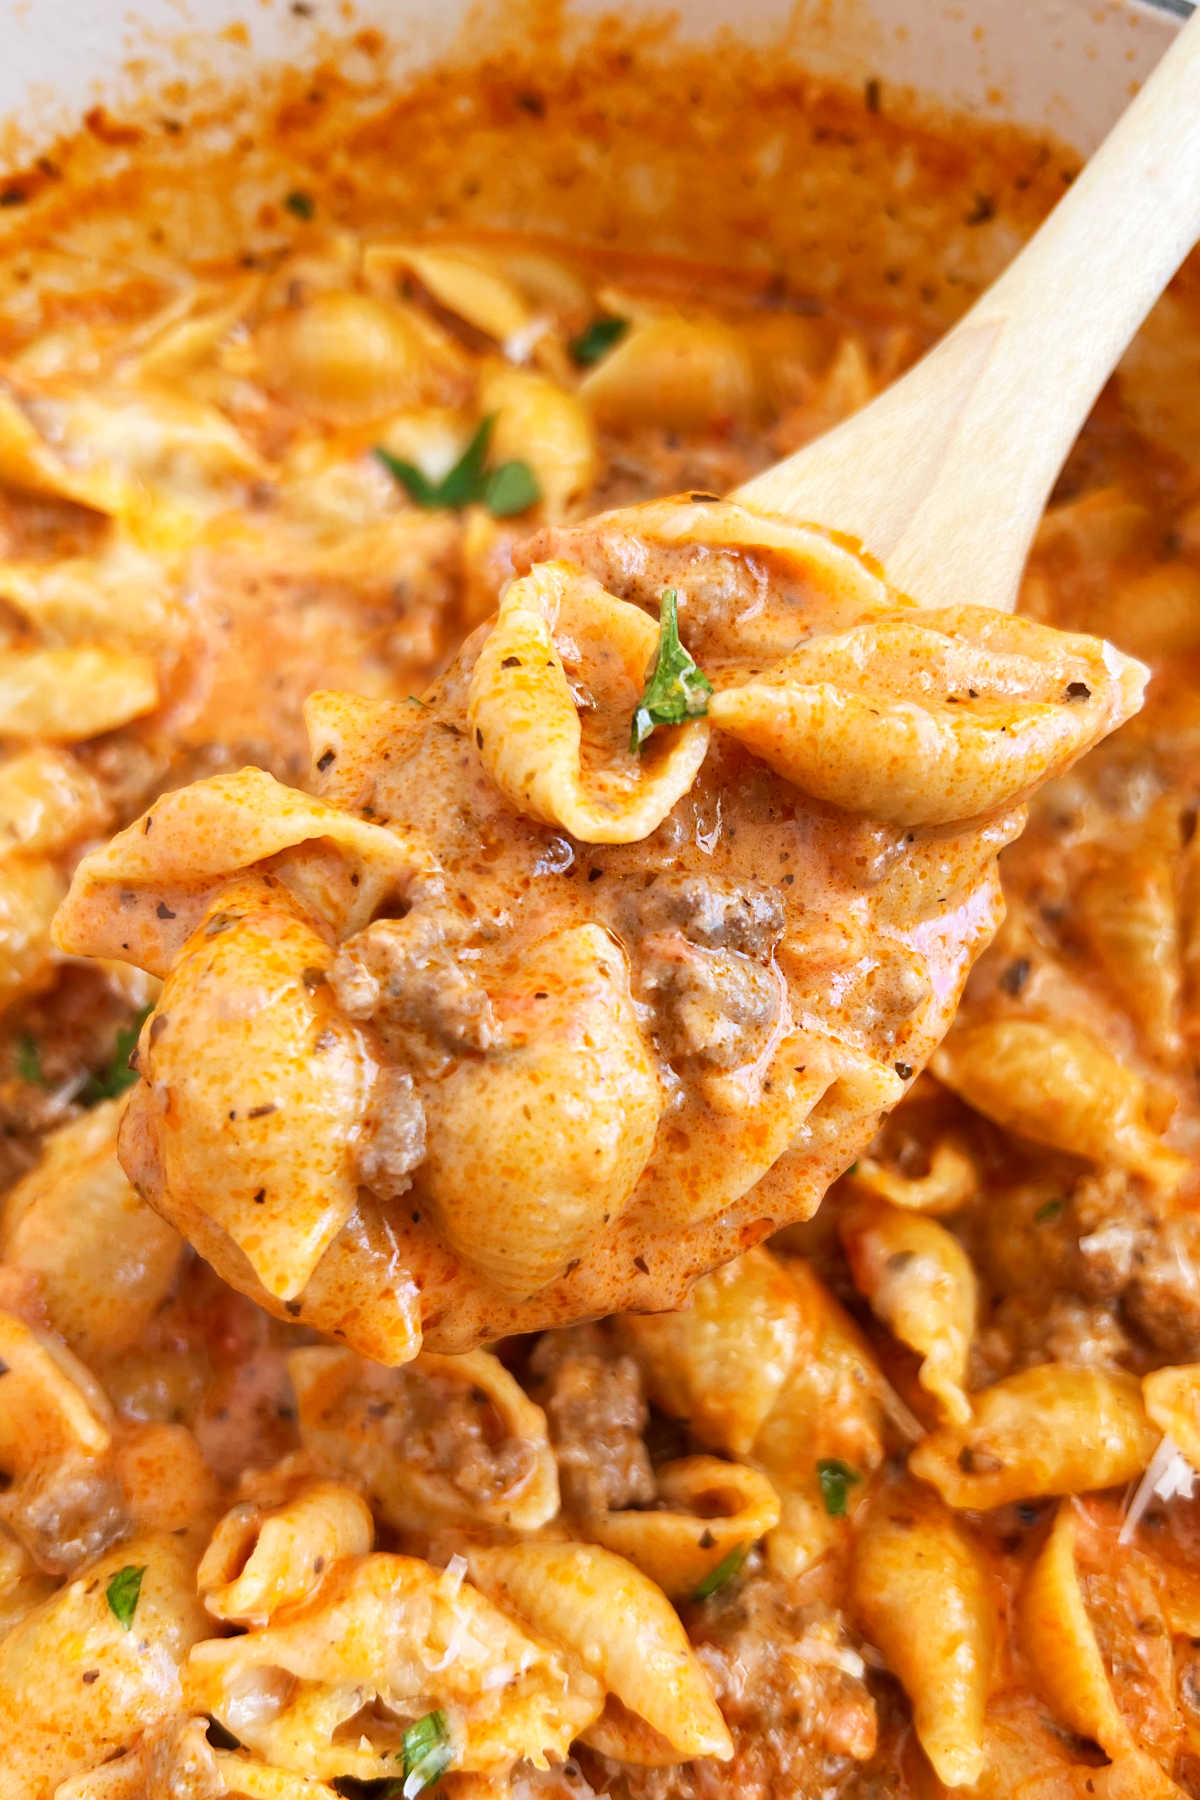 creamy shells and beef in tomato sauce on wooden spoon